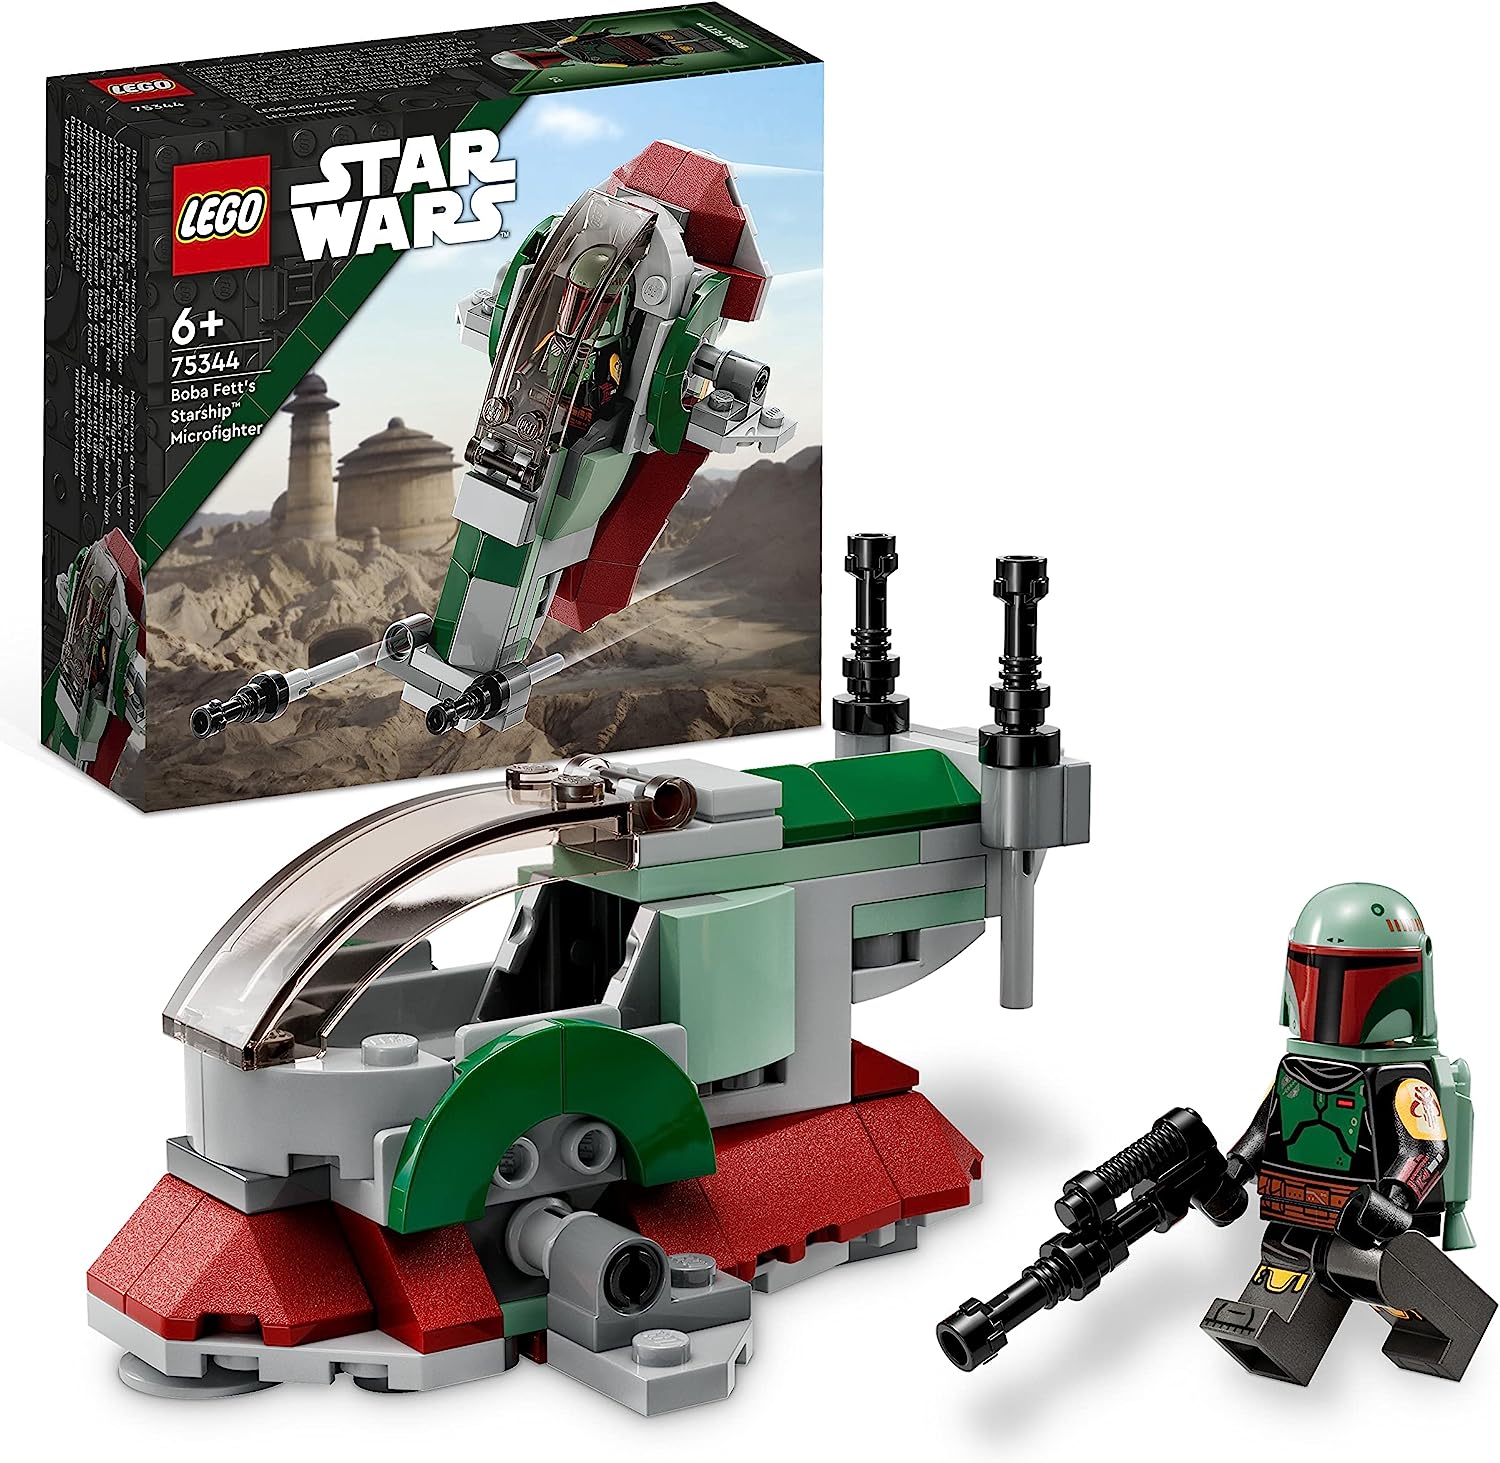 LEGO 75344 Star Wars Boba Fett Starship - Microfighter Set, Mandalorian Model, Buildable Toy with Patch Shooter and Adjustable Wings